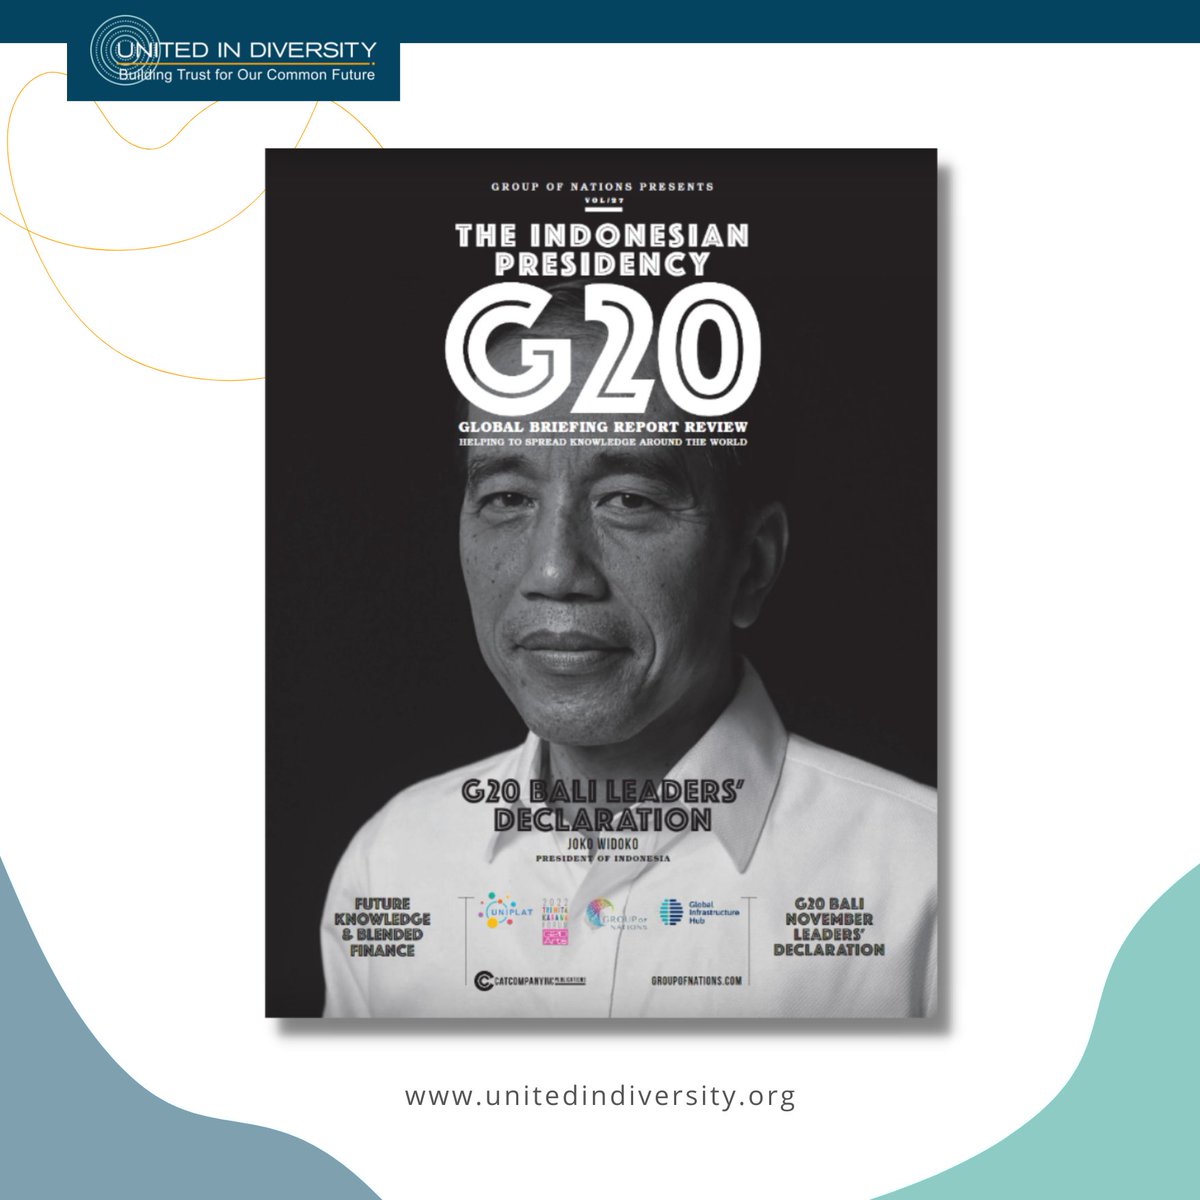 The Indonesian Presidency G20 Global Briefing Report Review by The Group of Nations 

Read More: bit.ly/3lYVky6

#groupofnations #G20 #recovertogether #recoverstronger #THKForum #thk2022 #THKforum2022 #unitedindiversity #UIDIndonesia #uidbalicampus